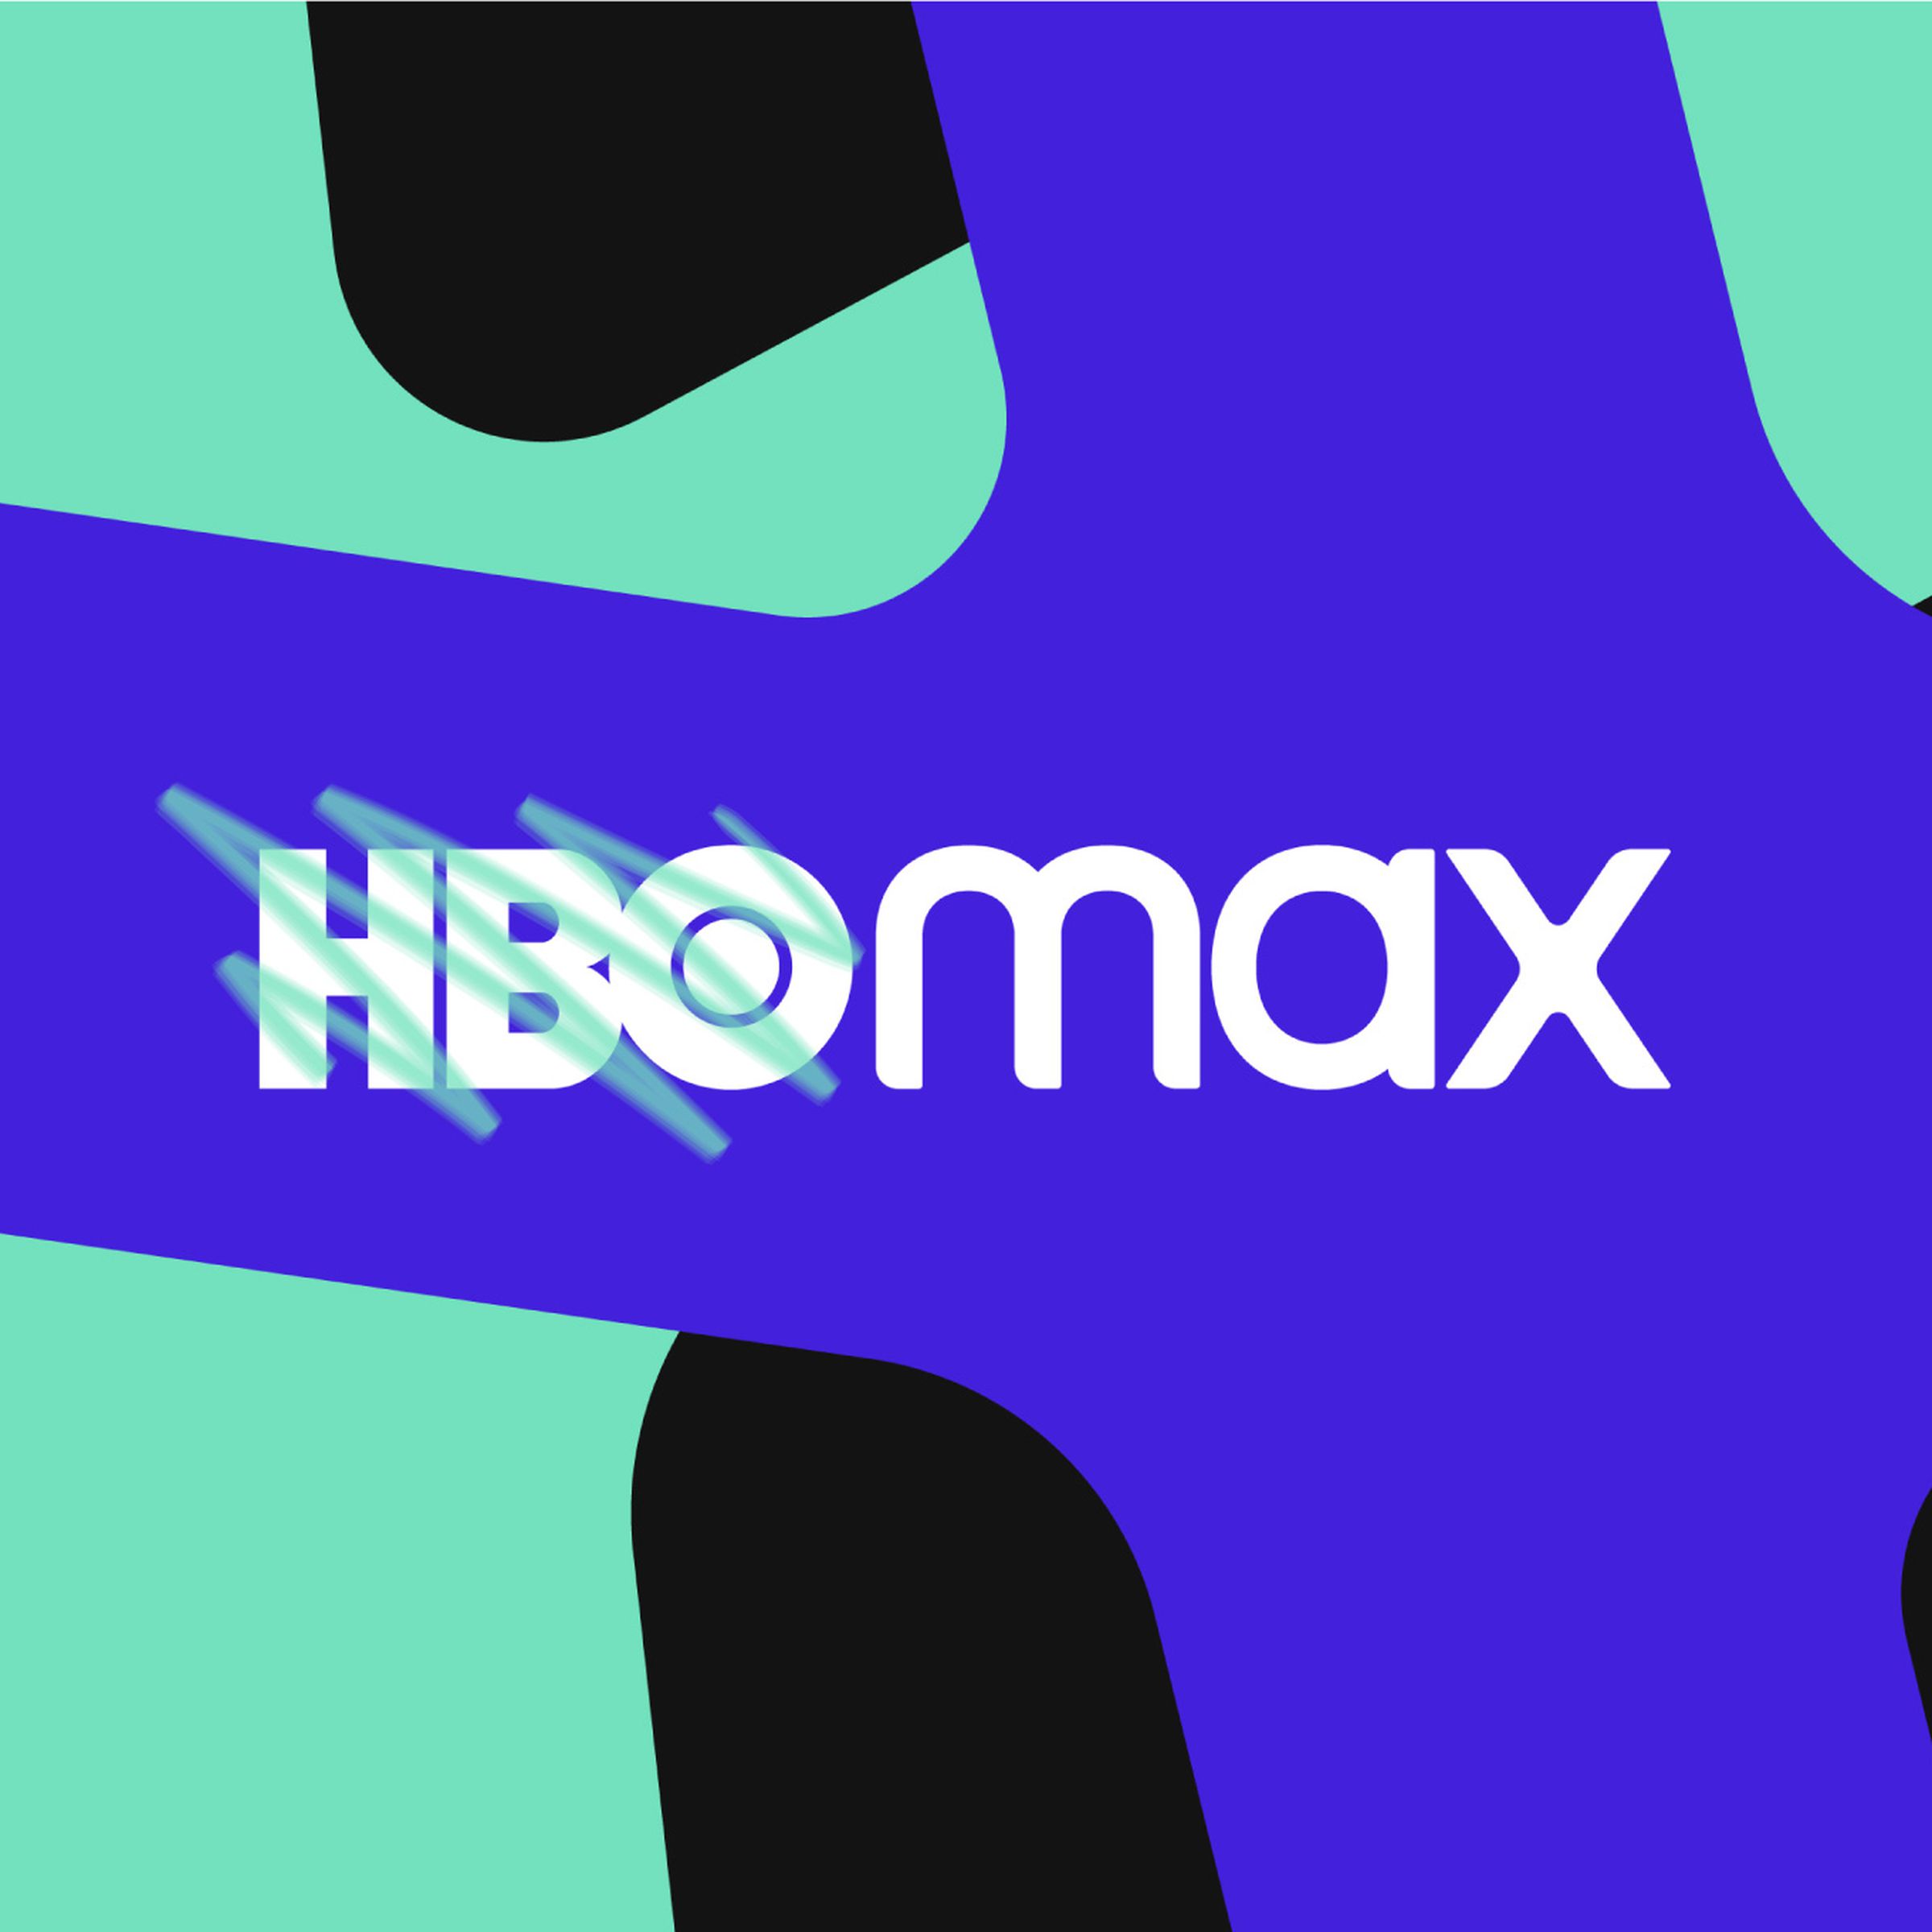 An illustration of the HBO Max logo with “HBO” scribbled out.